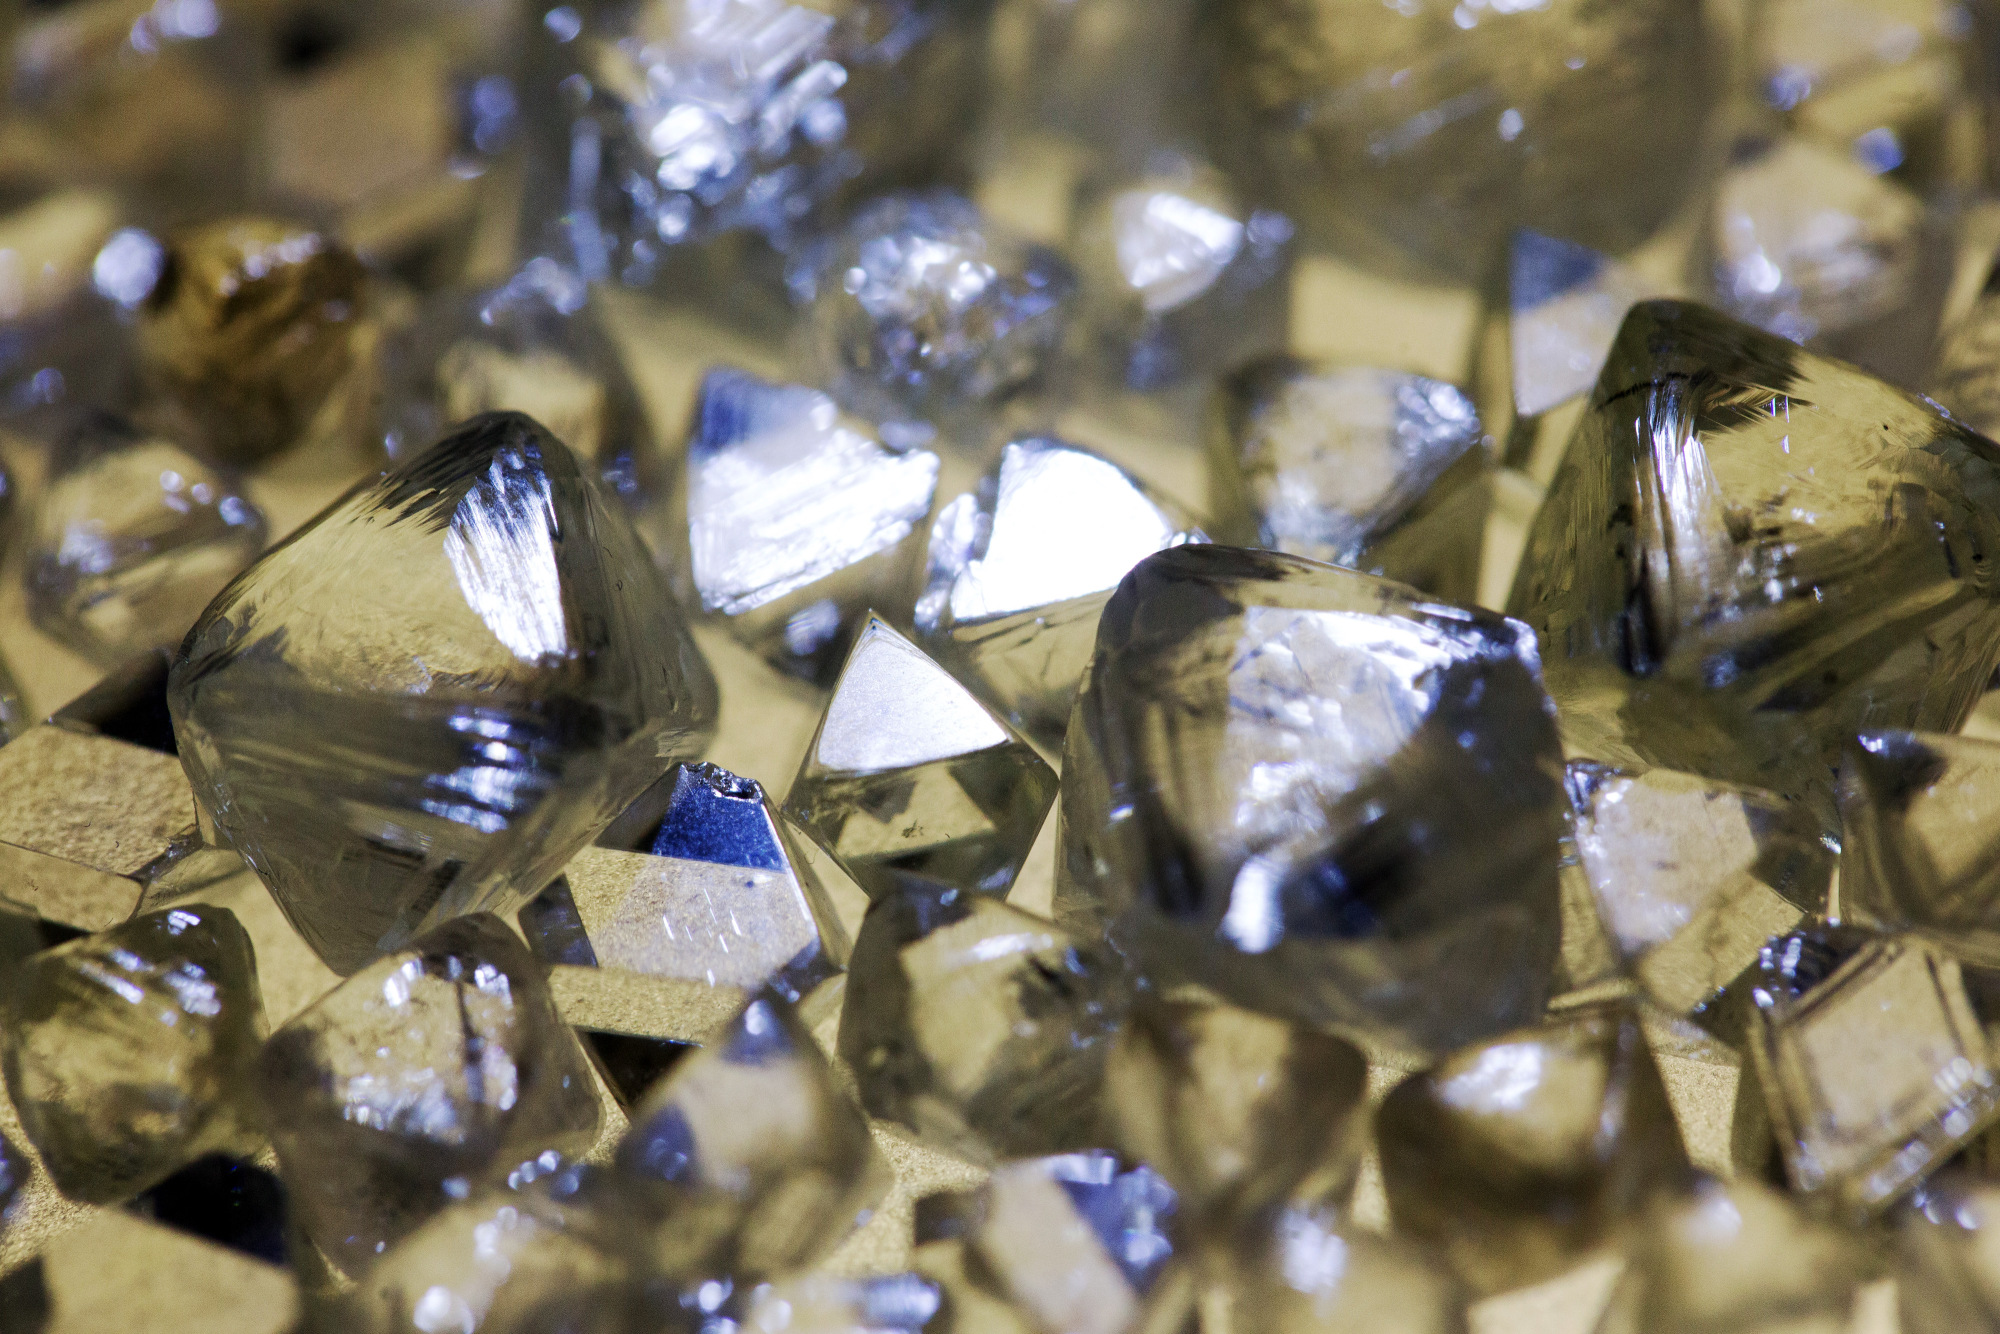 Diamond Miners Meet in Private to Discuss Fake Gems Issue - Bloomberg